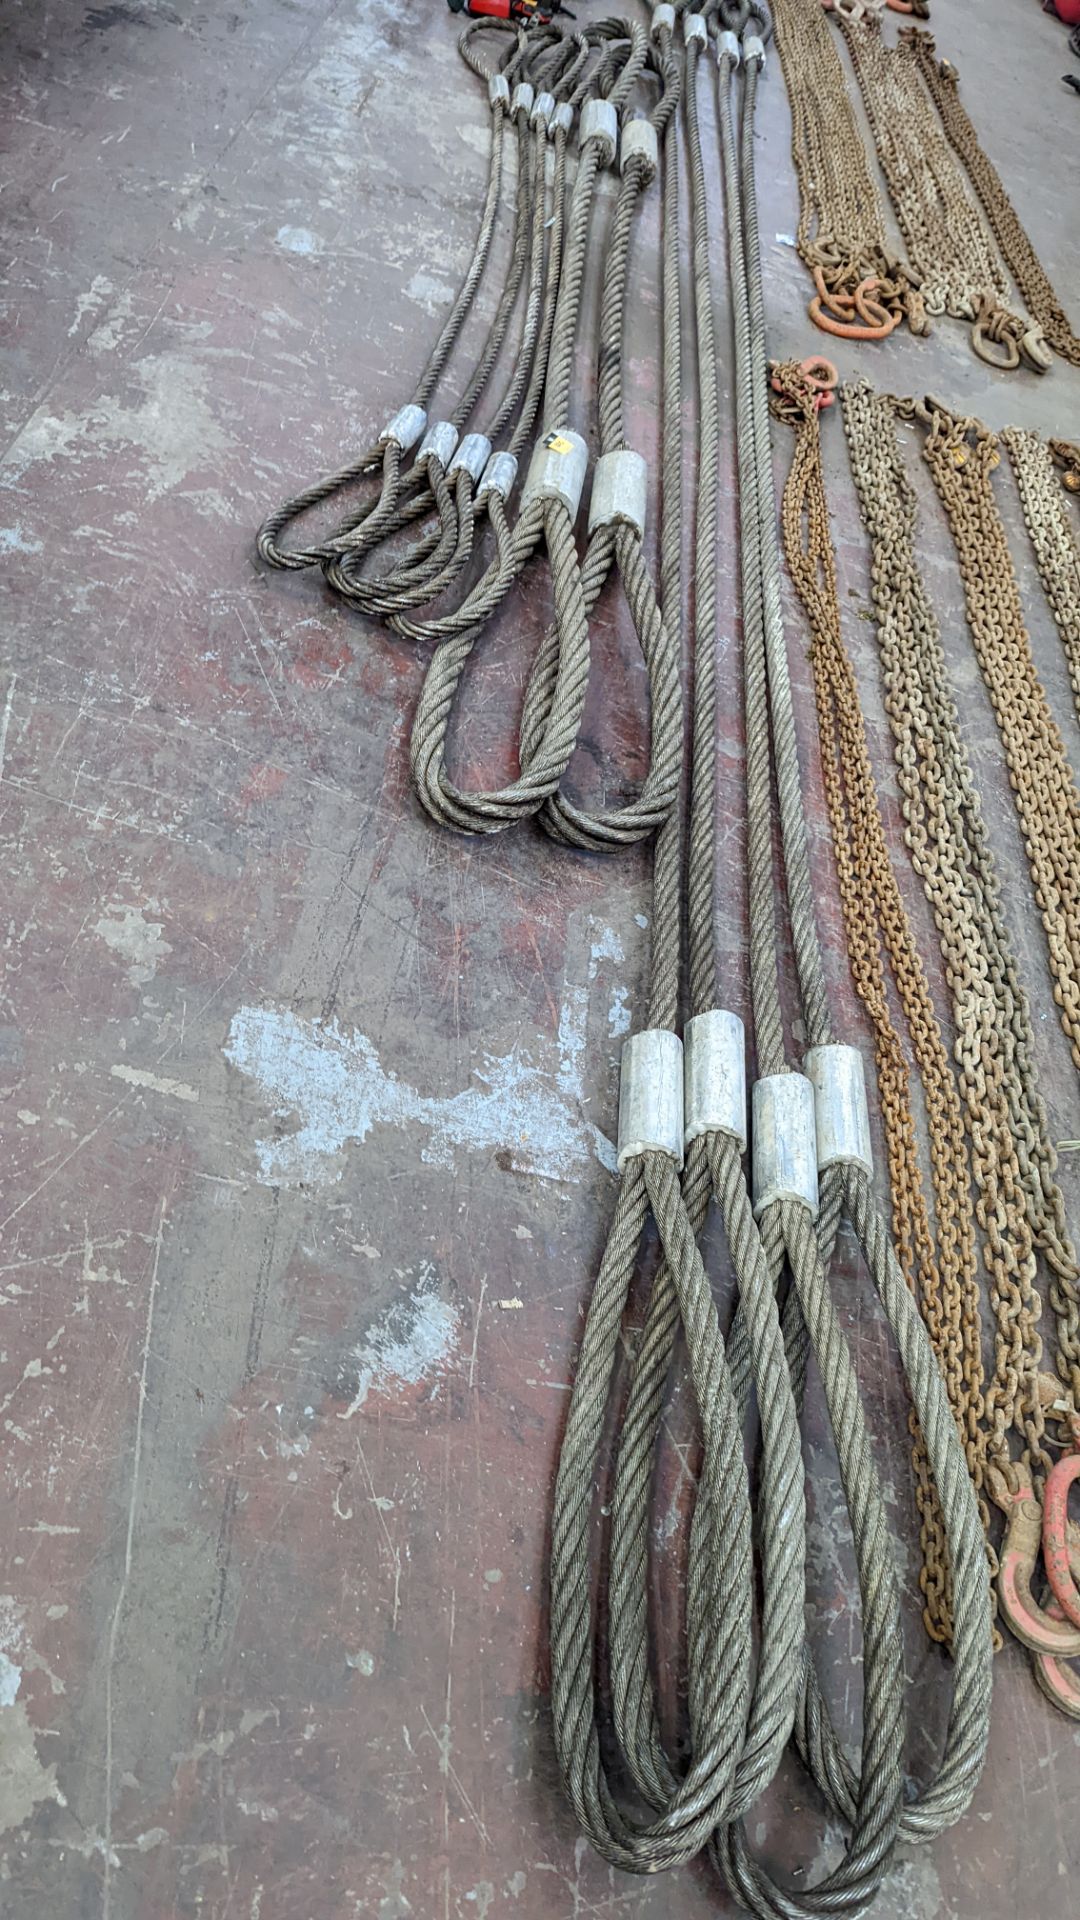 Quantity of metal "rope". This lot comprises 4 pieces, each measuring 6m long at the extremes, 2 off